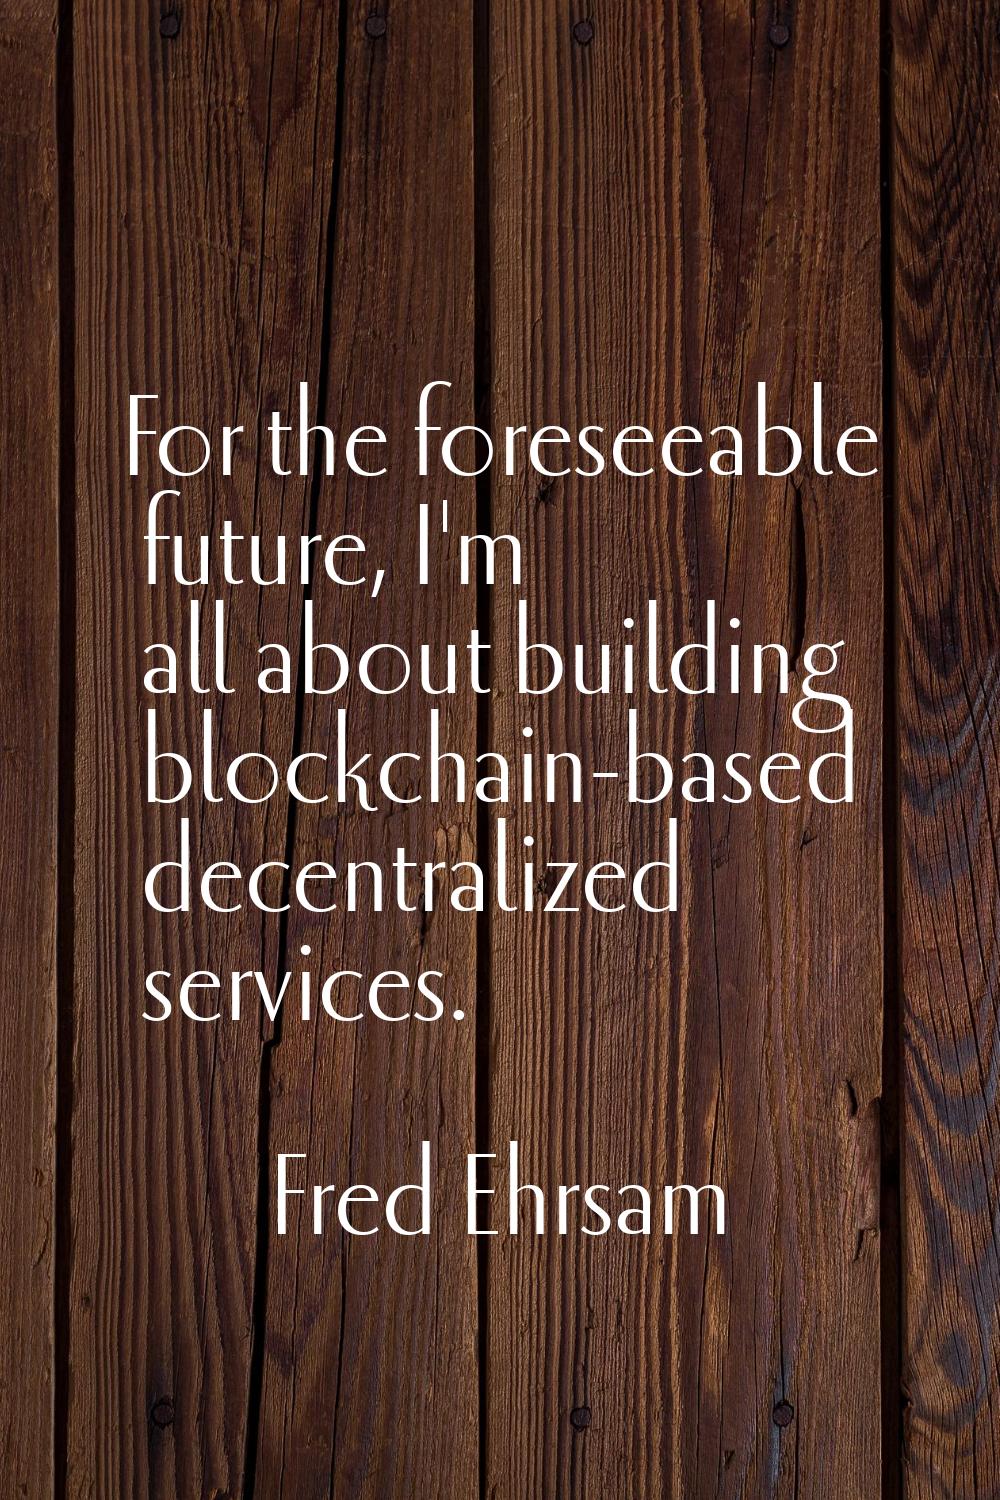 For the foreseeable future, I'm all about building blockchain-based decentralized services.